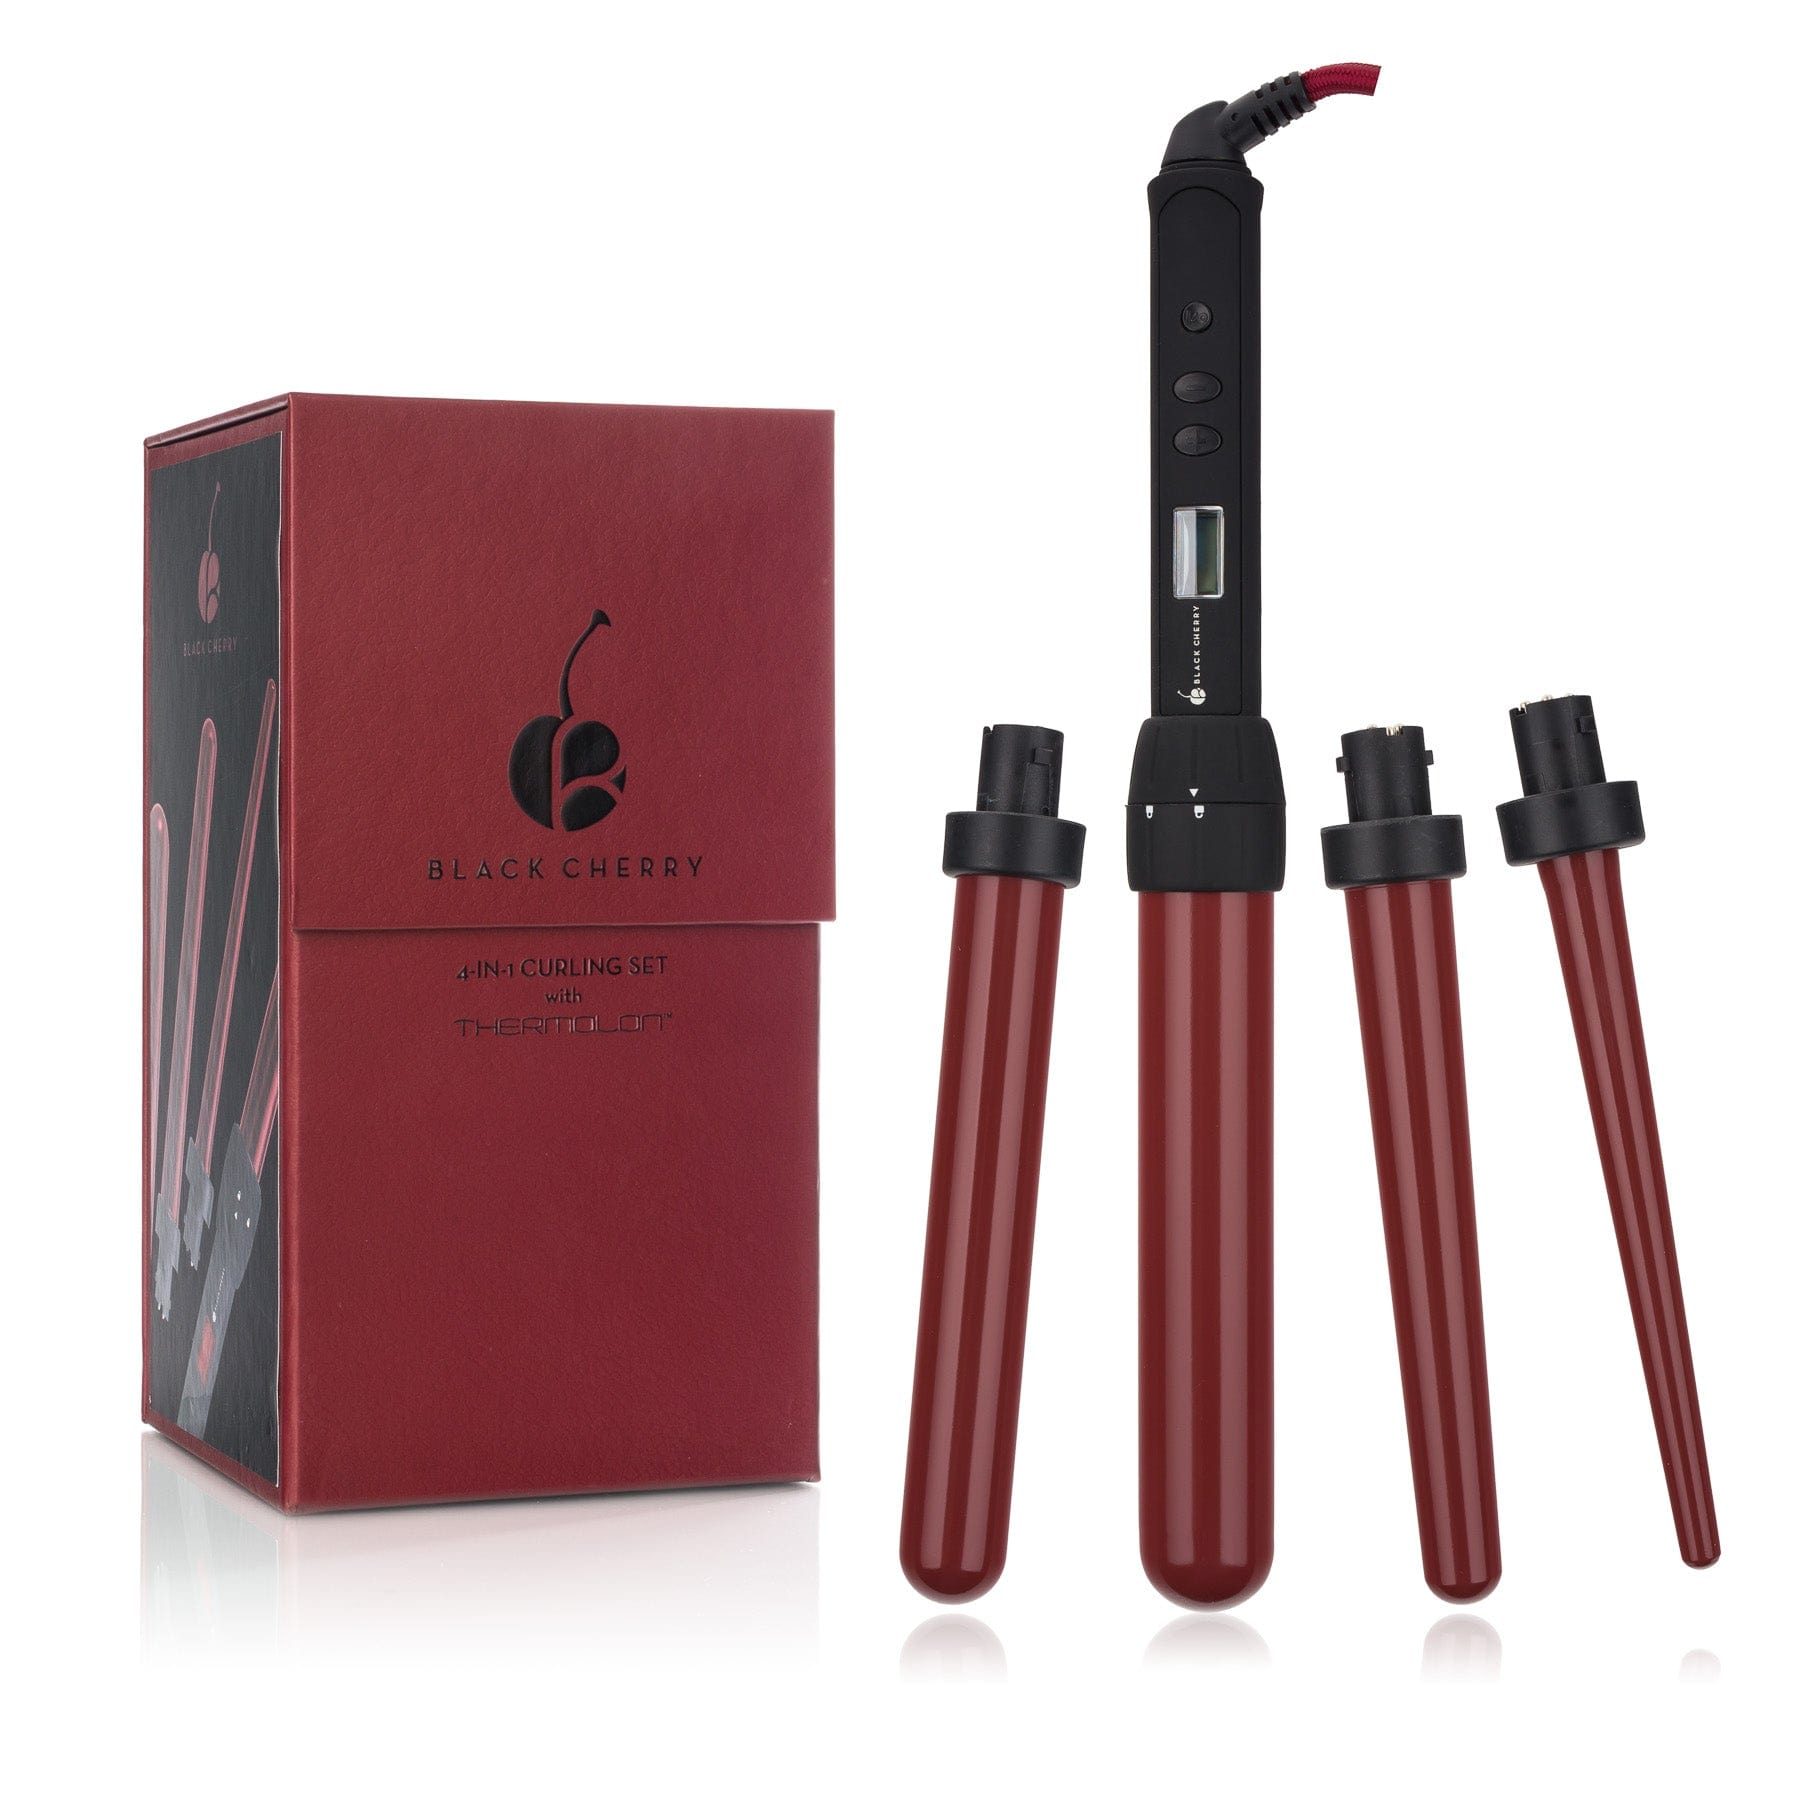 Cortex Beauty 4-IN-1 Curling Wand Set with Thermolon Plates